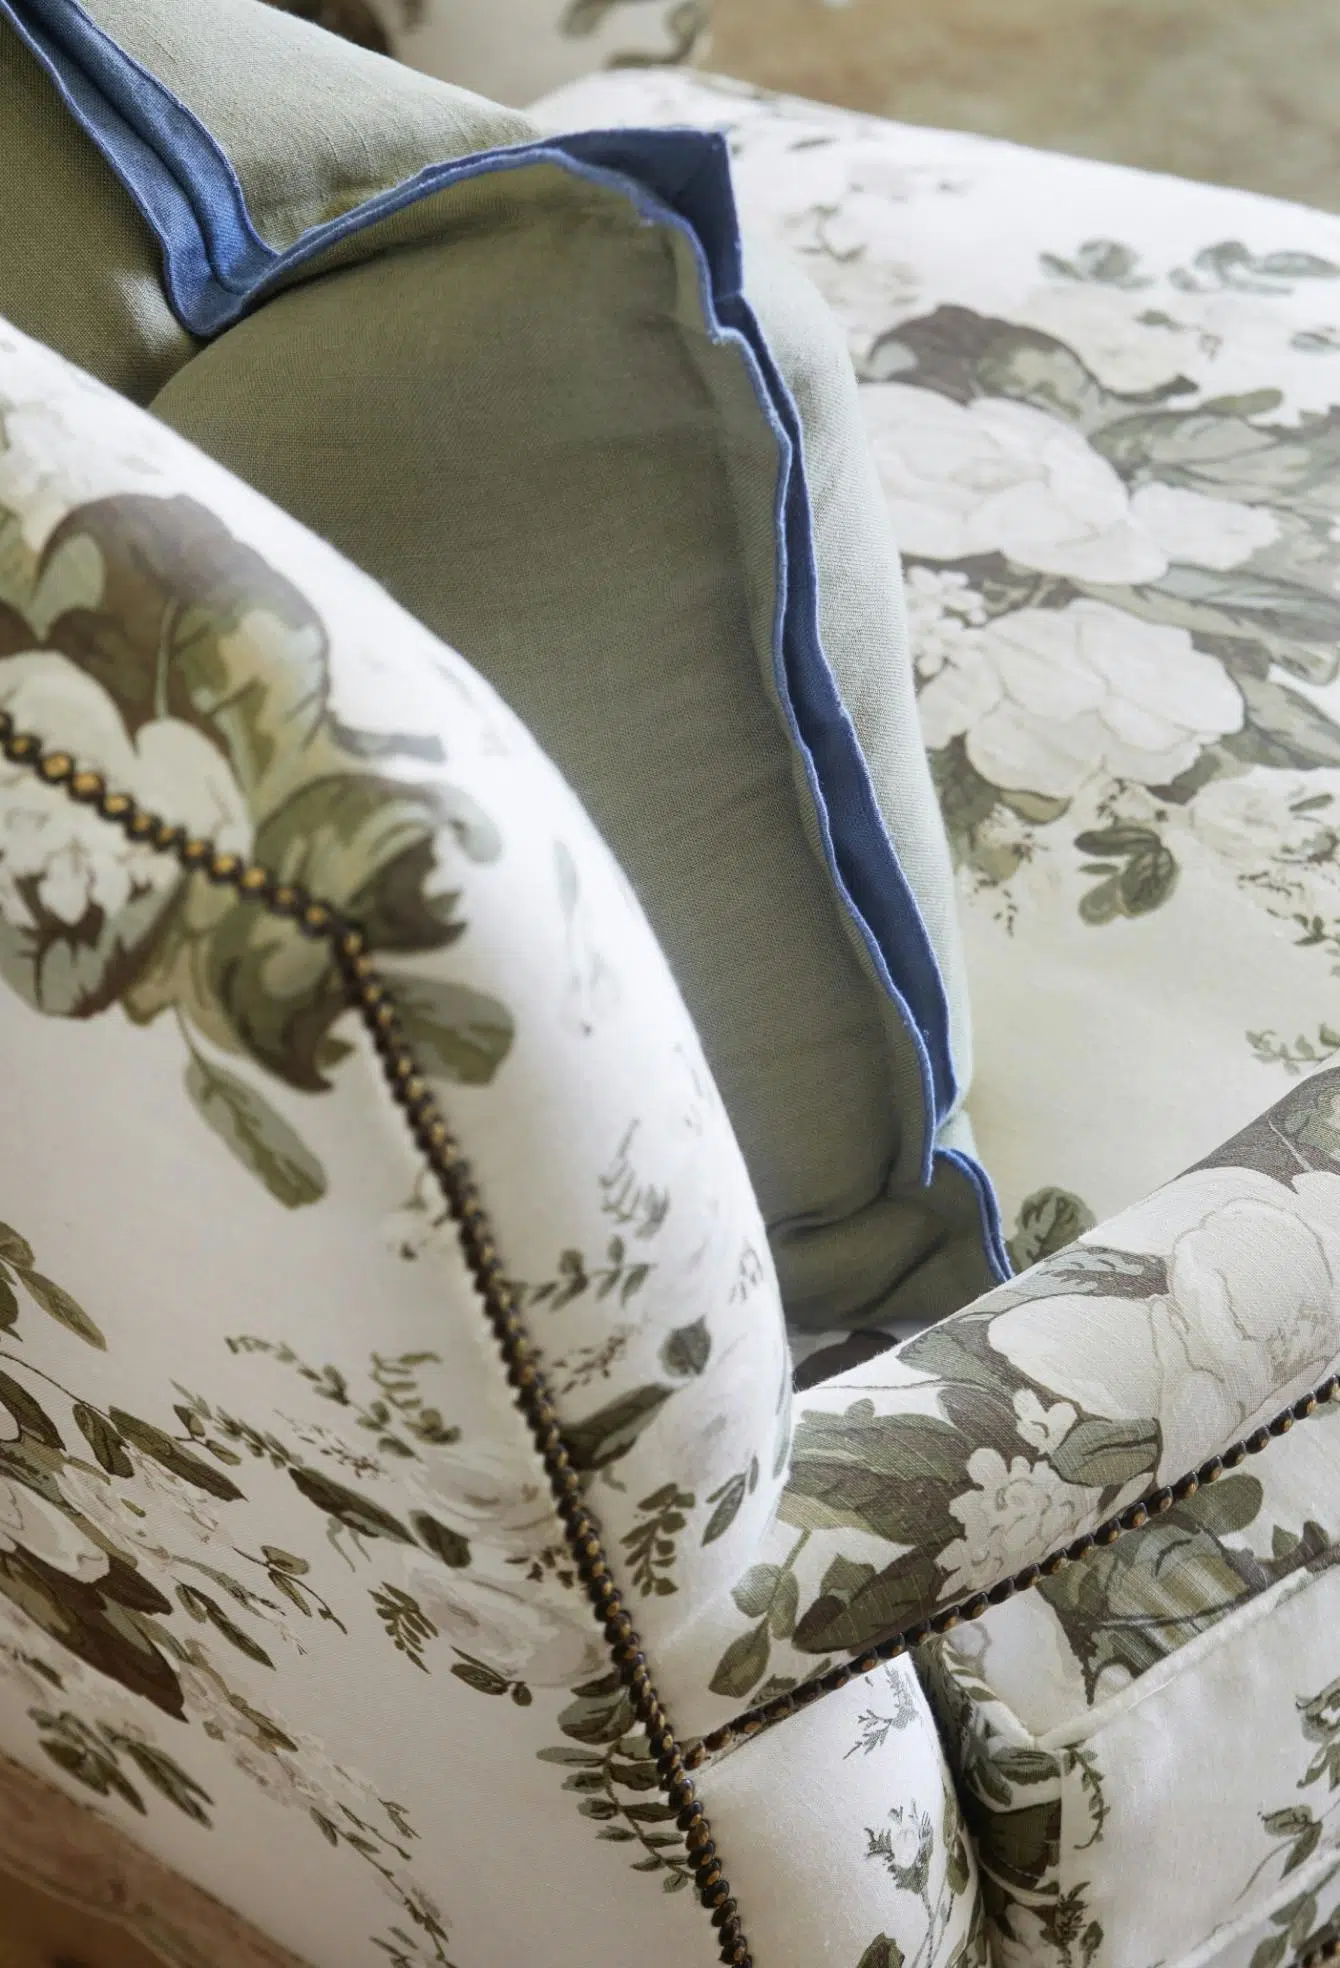 A detail of a studded armchair upholstered in a botanical fabric in shades of green also shows a green cushion with blue details